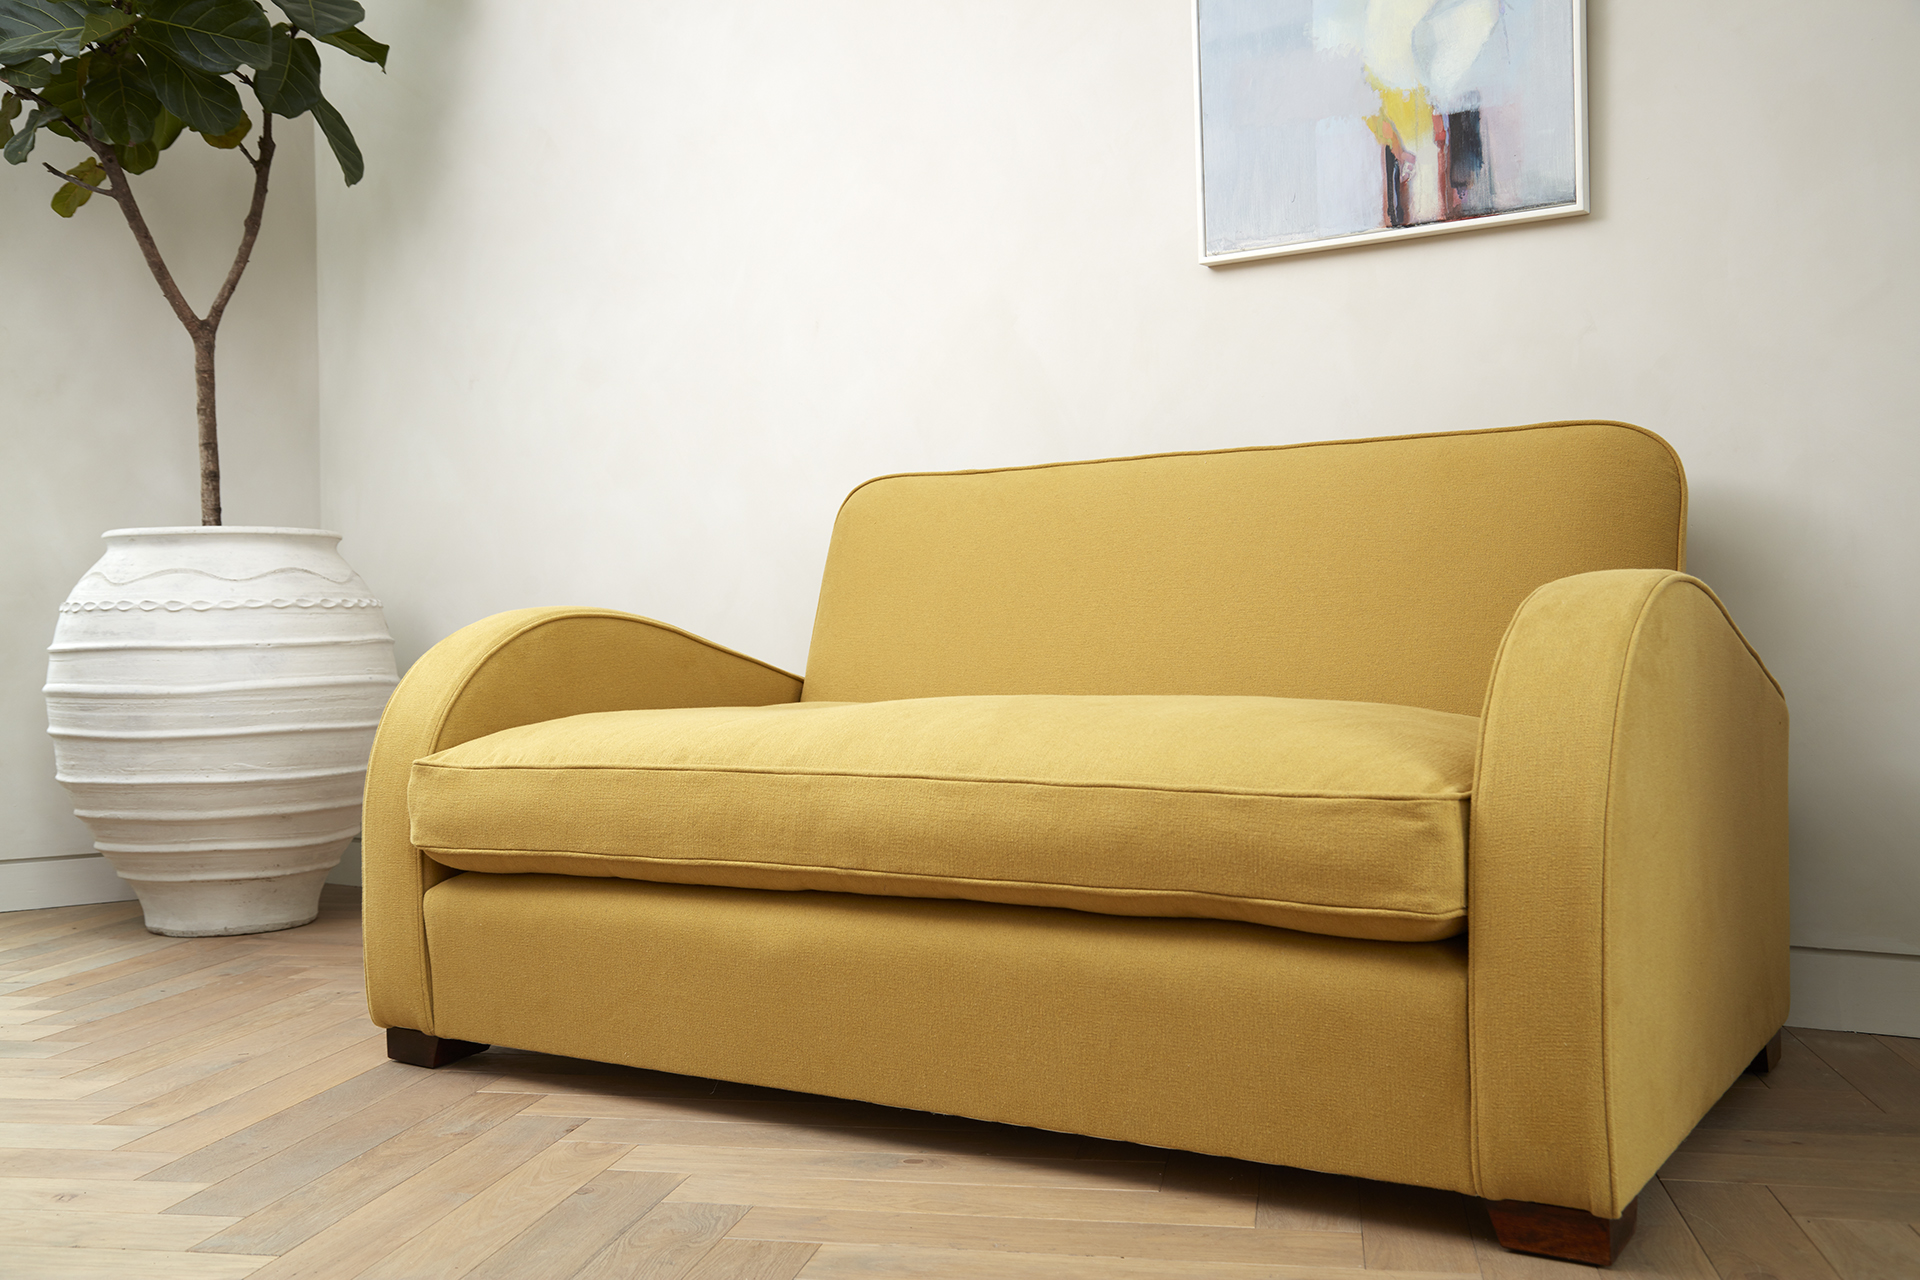 Yellow 2 seater Daisy sofa in 100% cotton, also offering bespoke furniture.